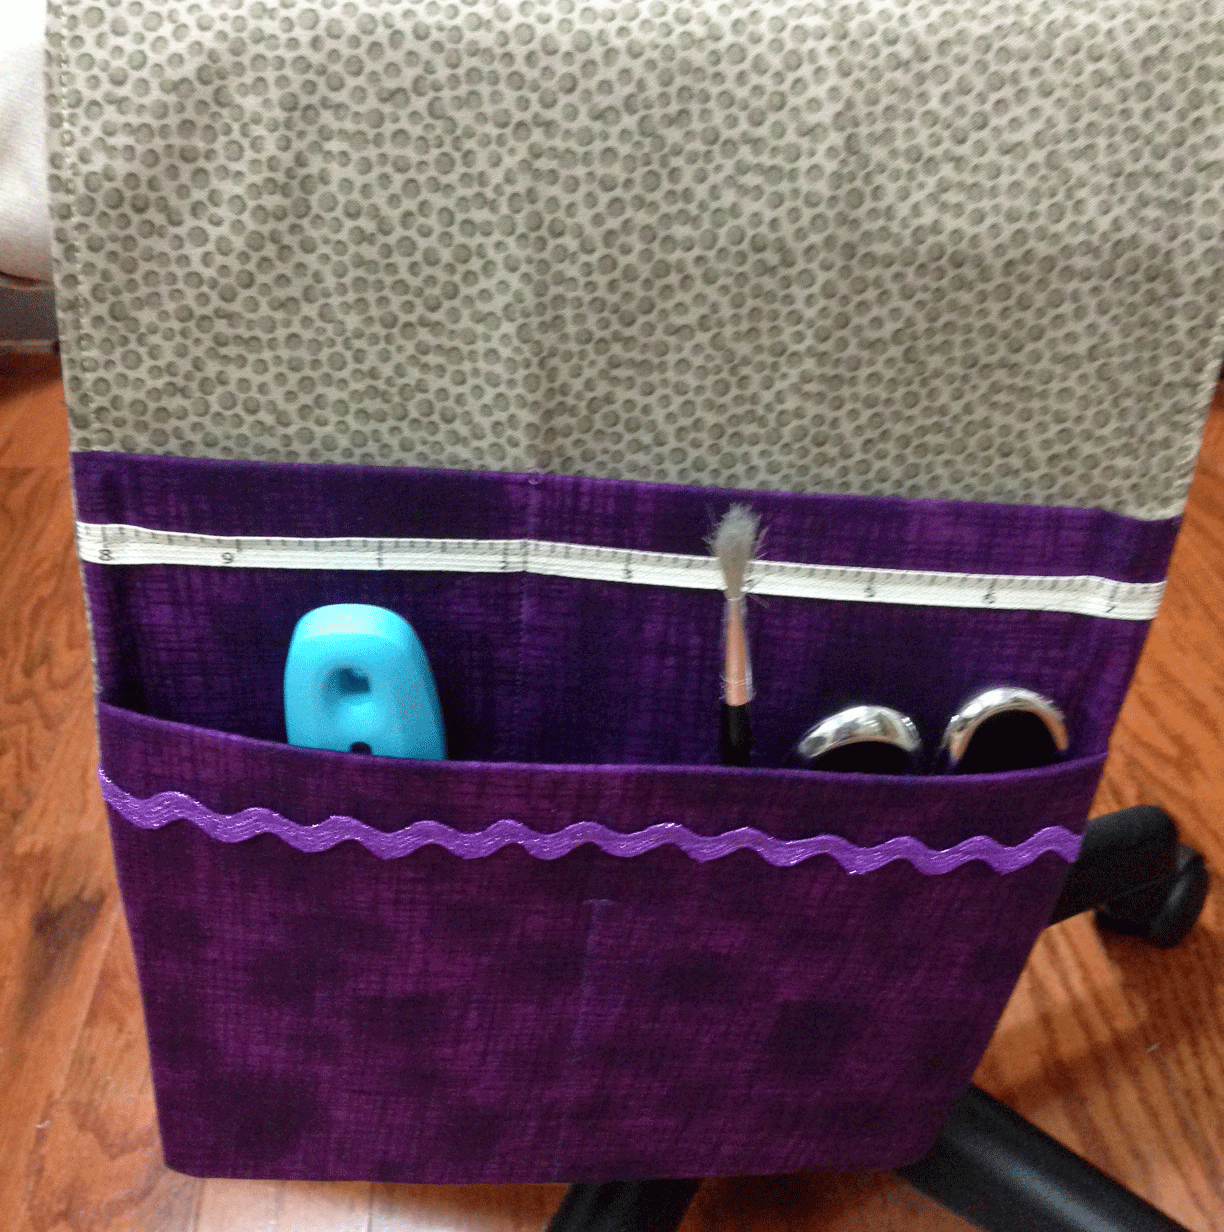 Sewing Chair Organizer - B's Treehouse